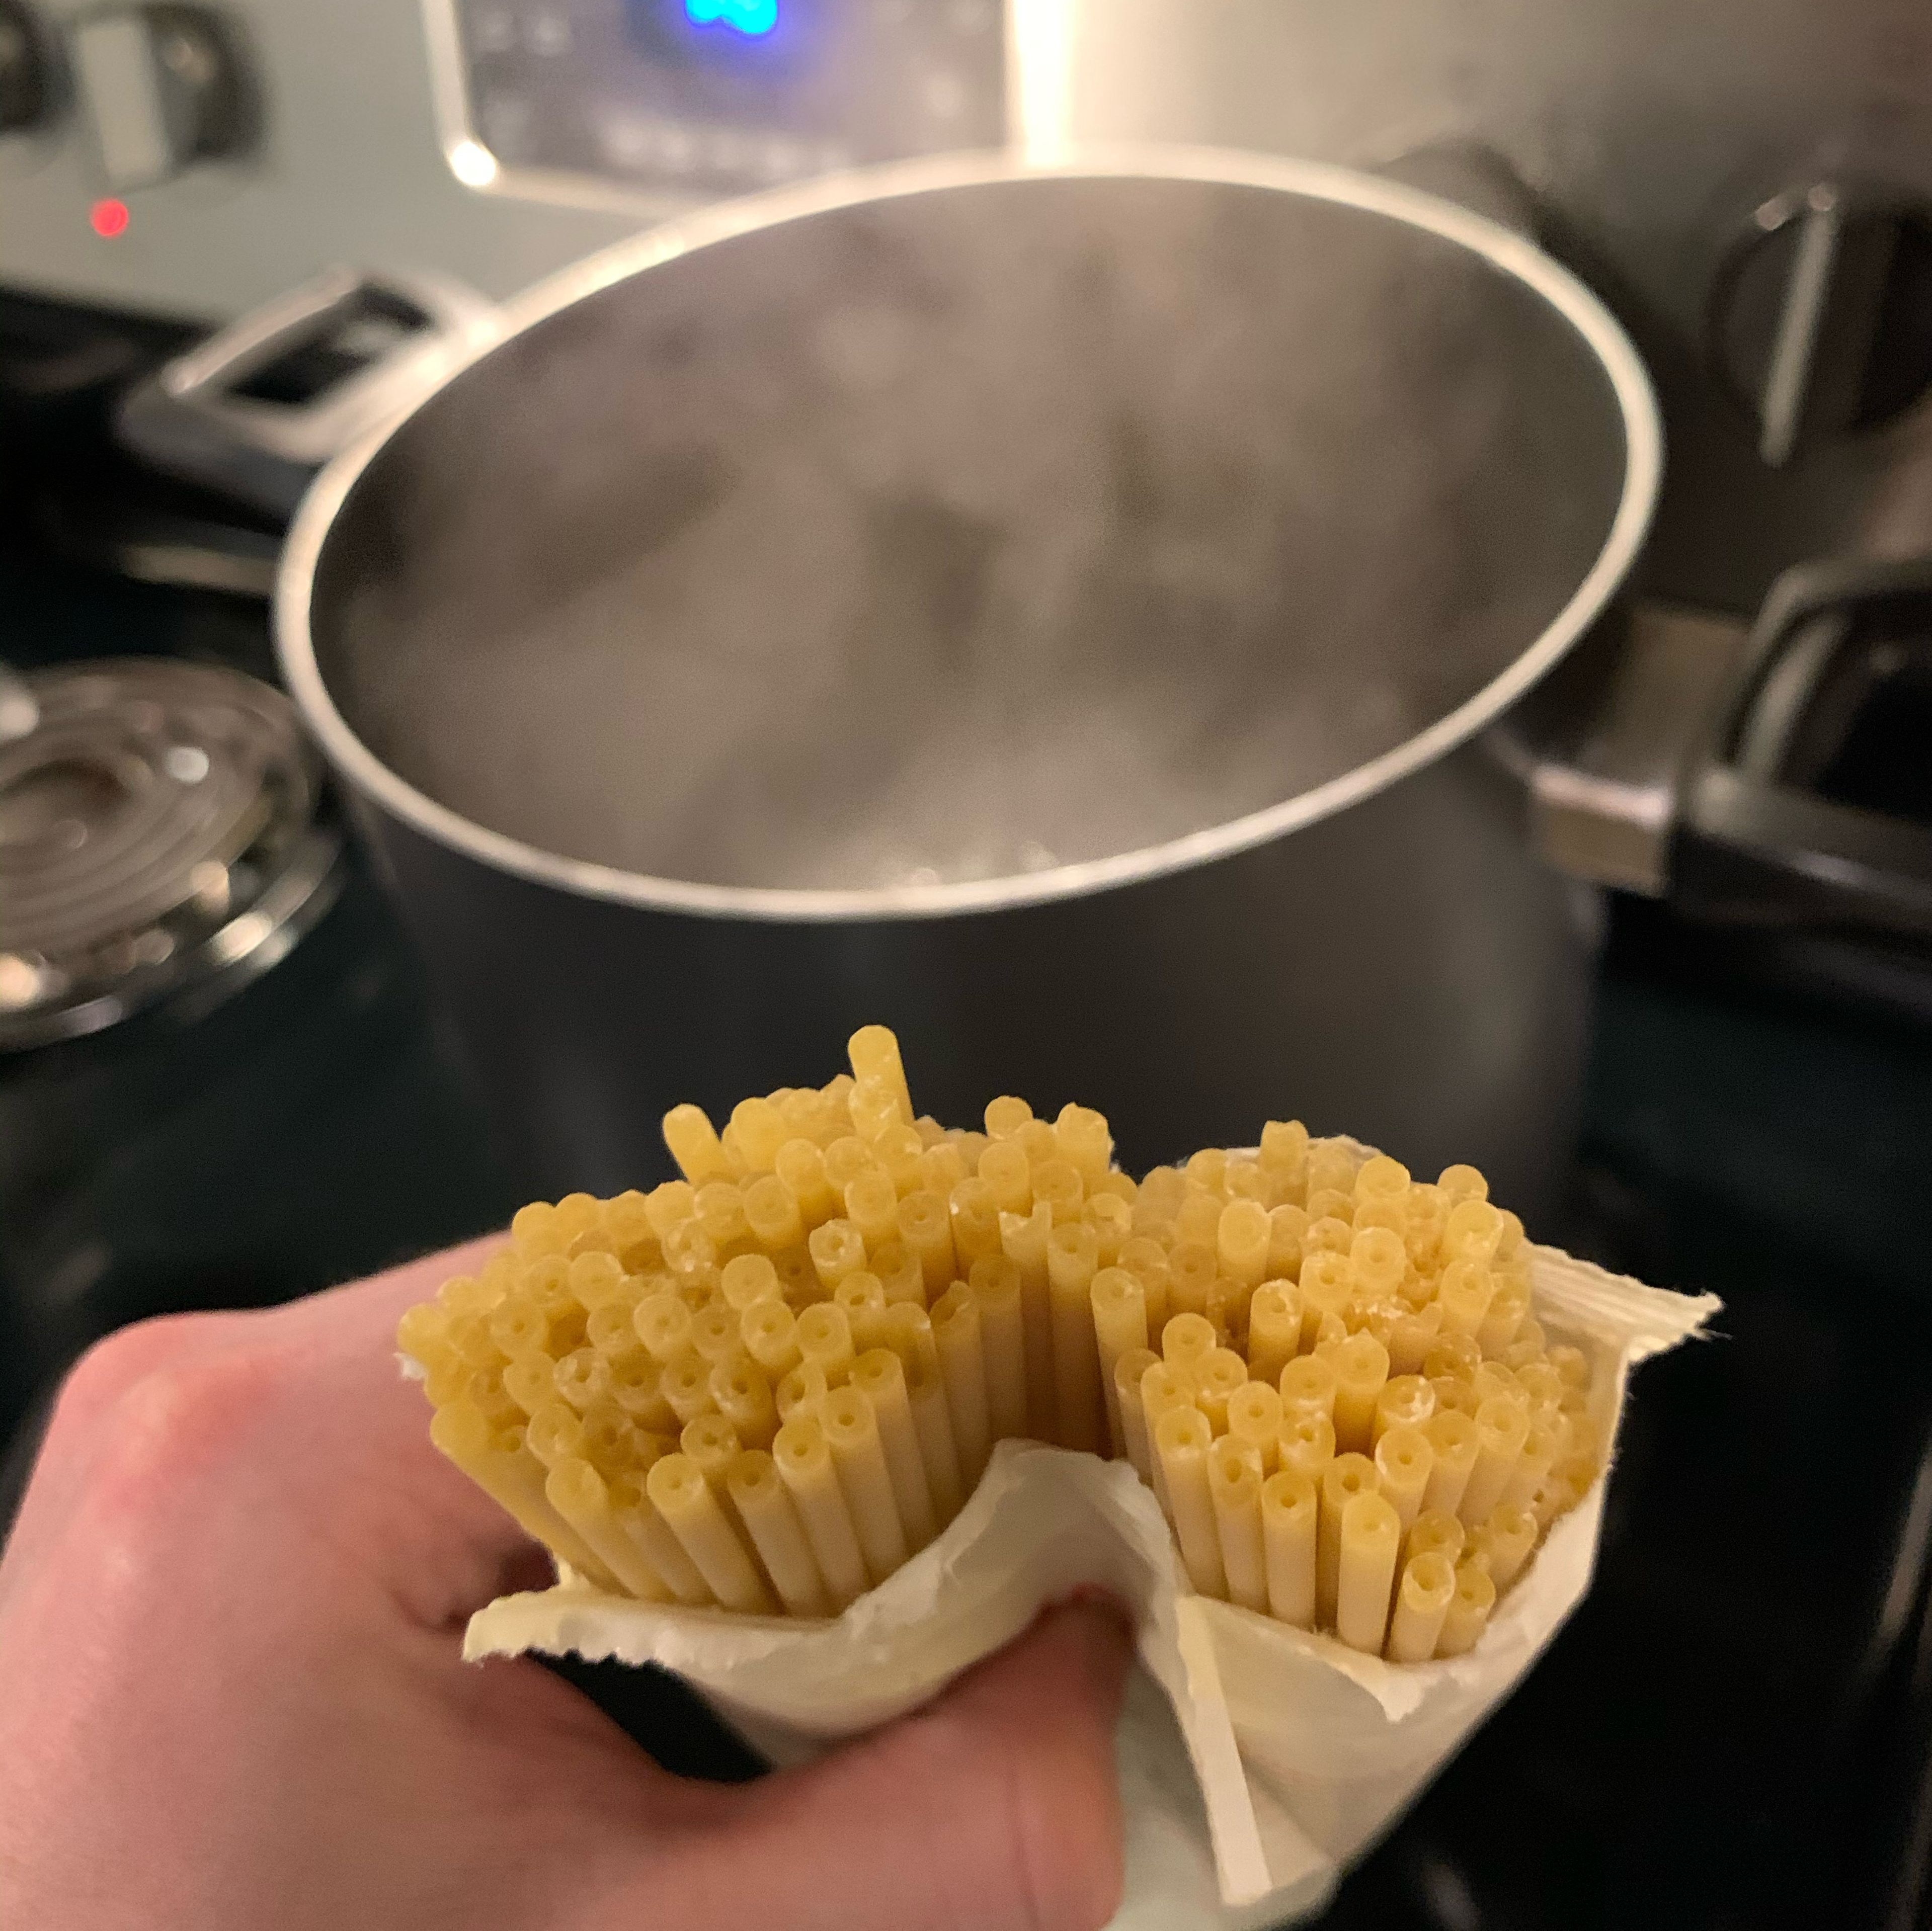 When water starts boiling, add half a package of bucatini and reduce heat to medium high to prevent boiling over. Follow cooking instructions on package. About halfway through cooking, turn heat off on pancetta.